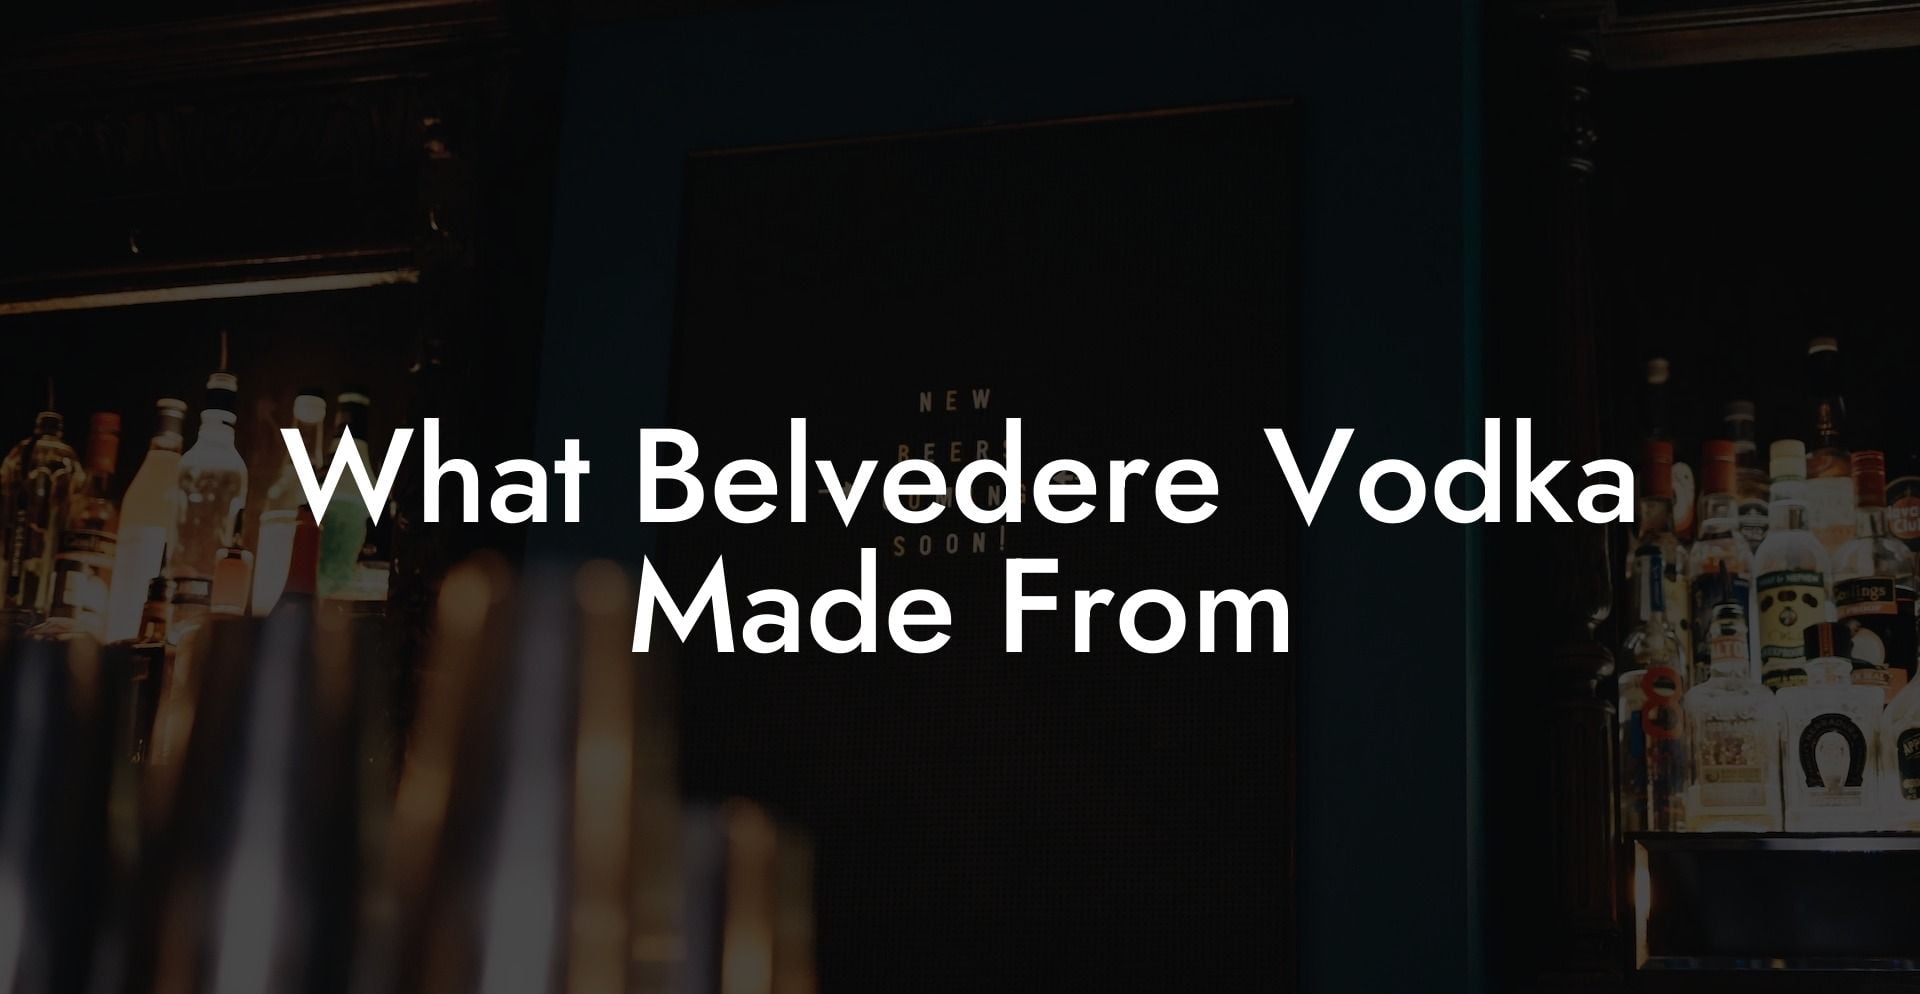 What Belvedere Vodka Made From